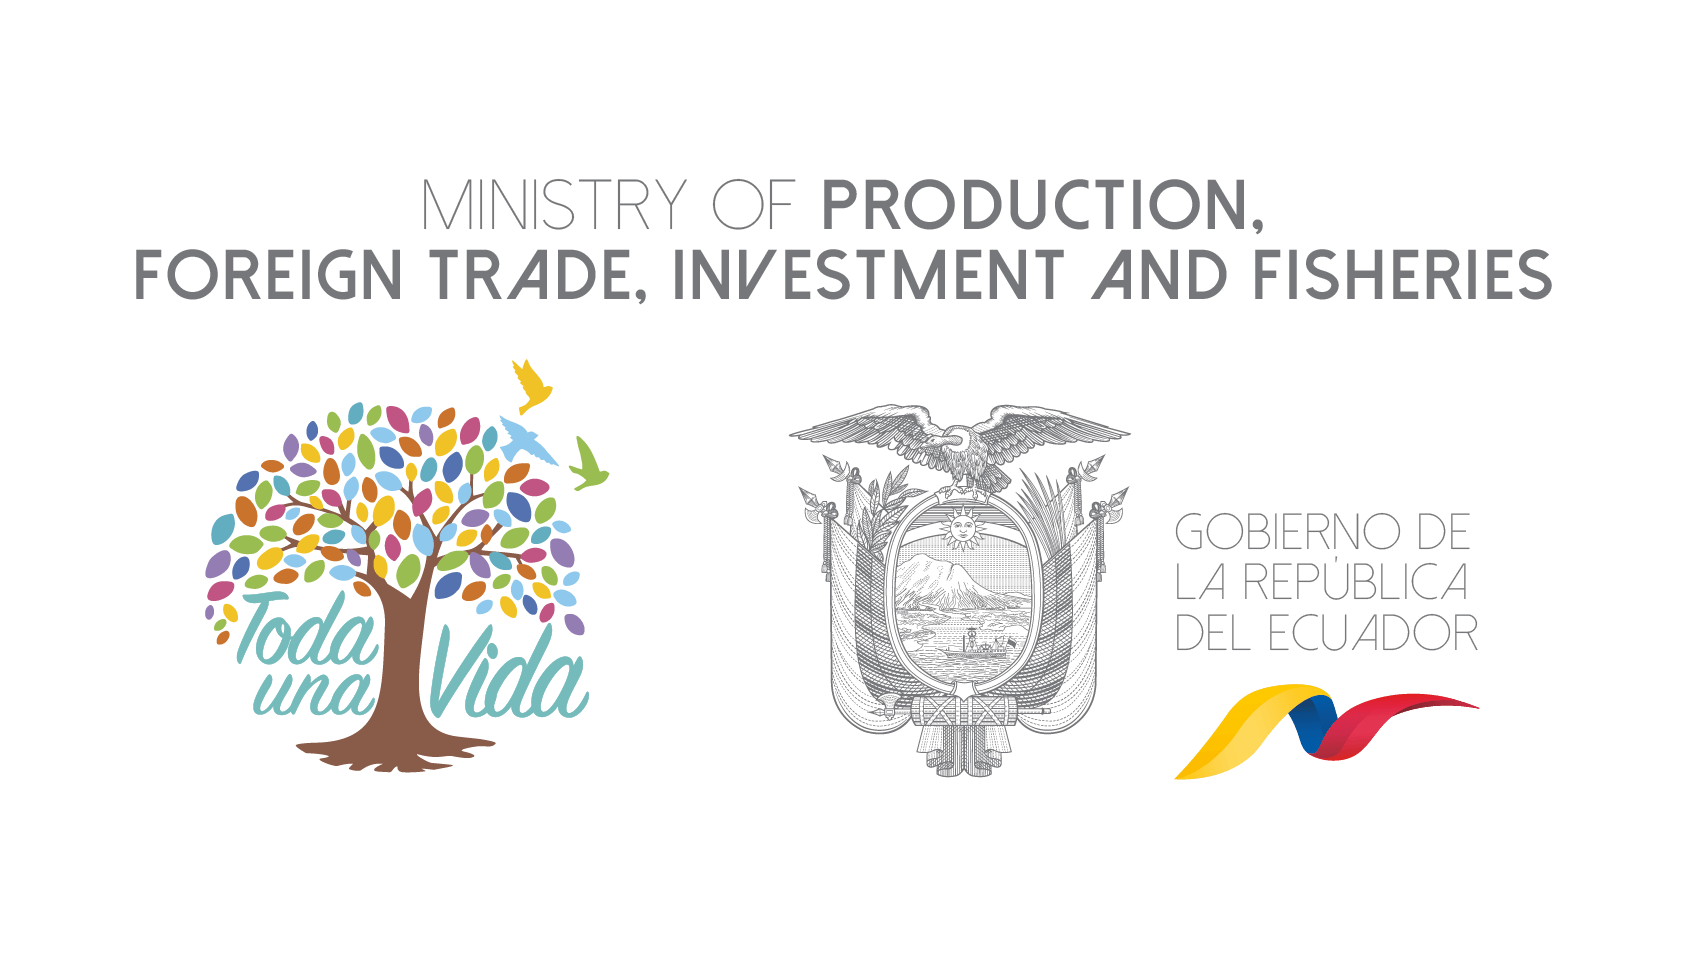 MINISTRY OF PRODUCTION, FOREIGN TRADE, INVESTMENT AND FISHERIES